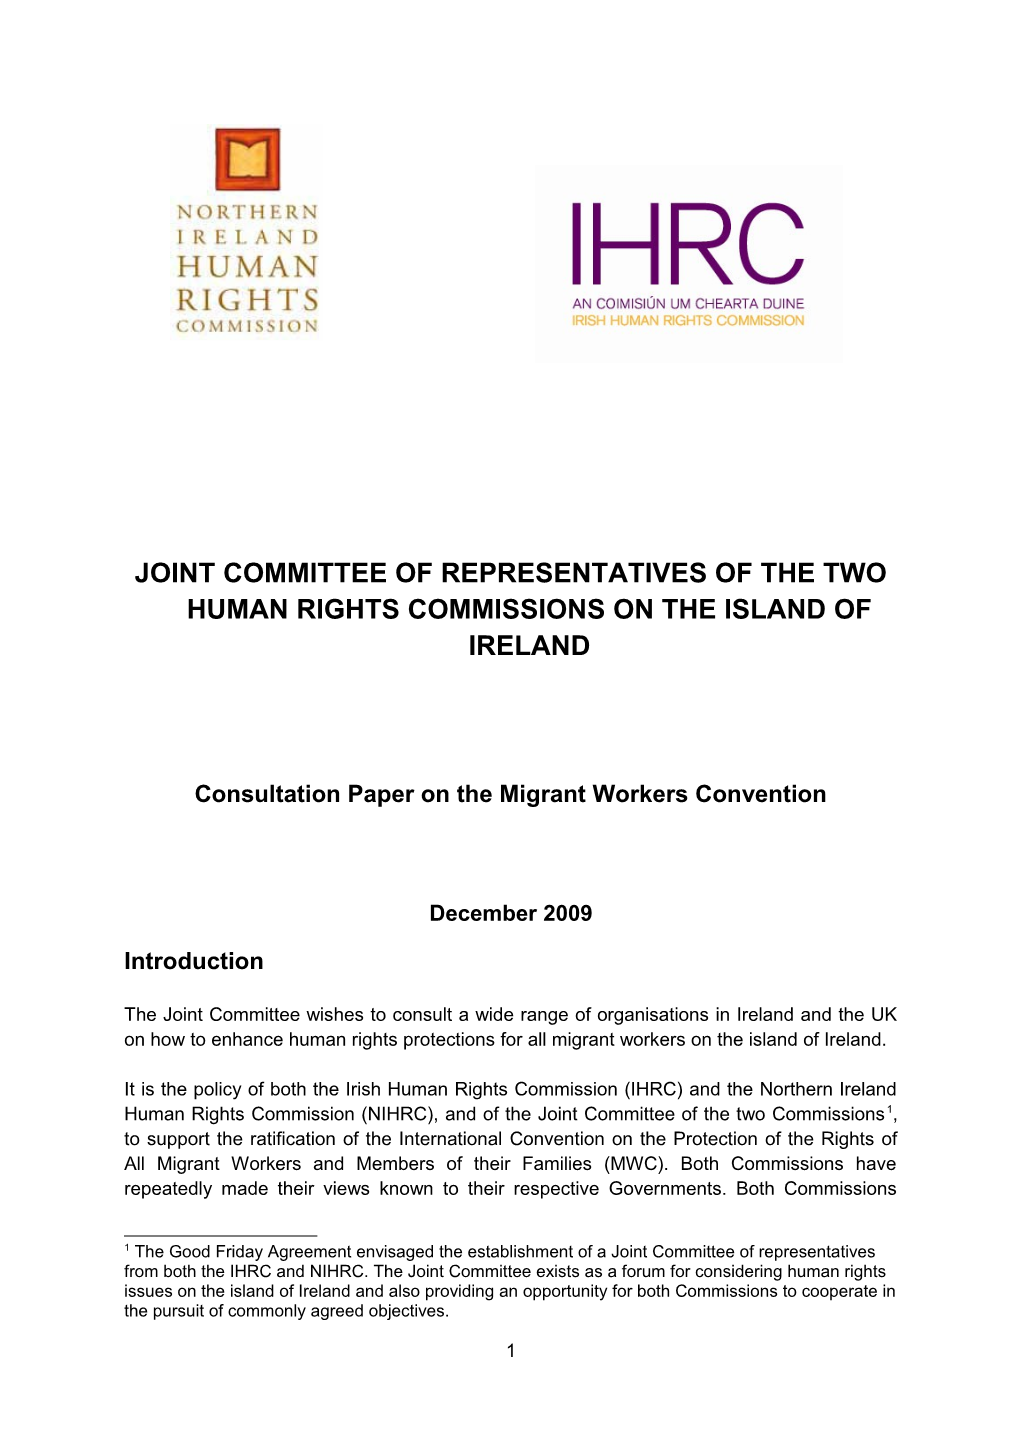 Joint Committee of Representatives of the Two Human Rights Commissions on the Island of Ireland